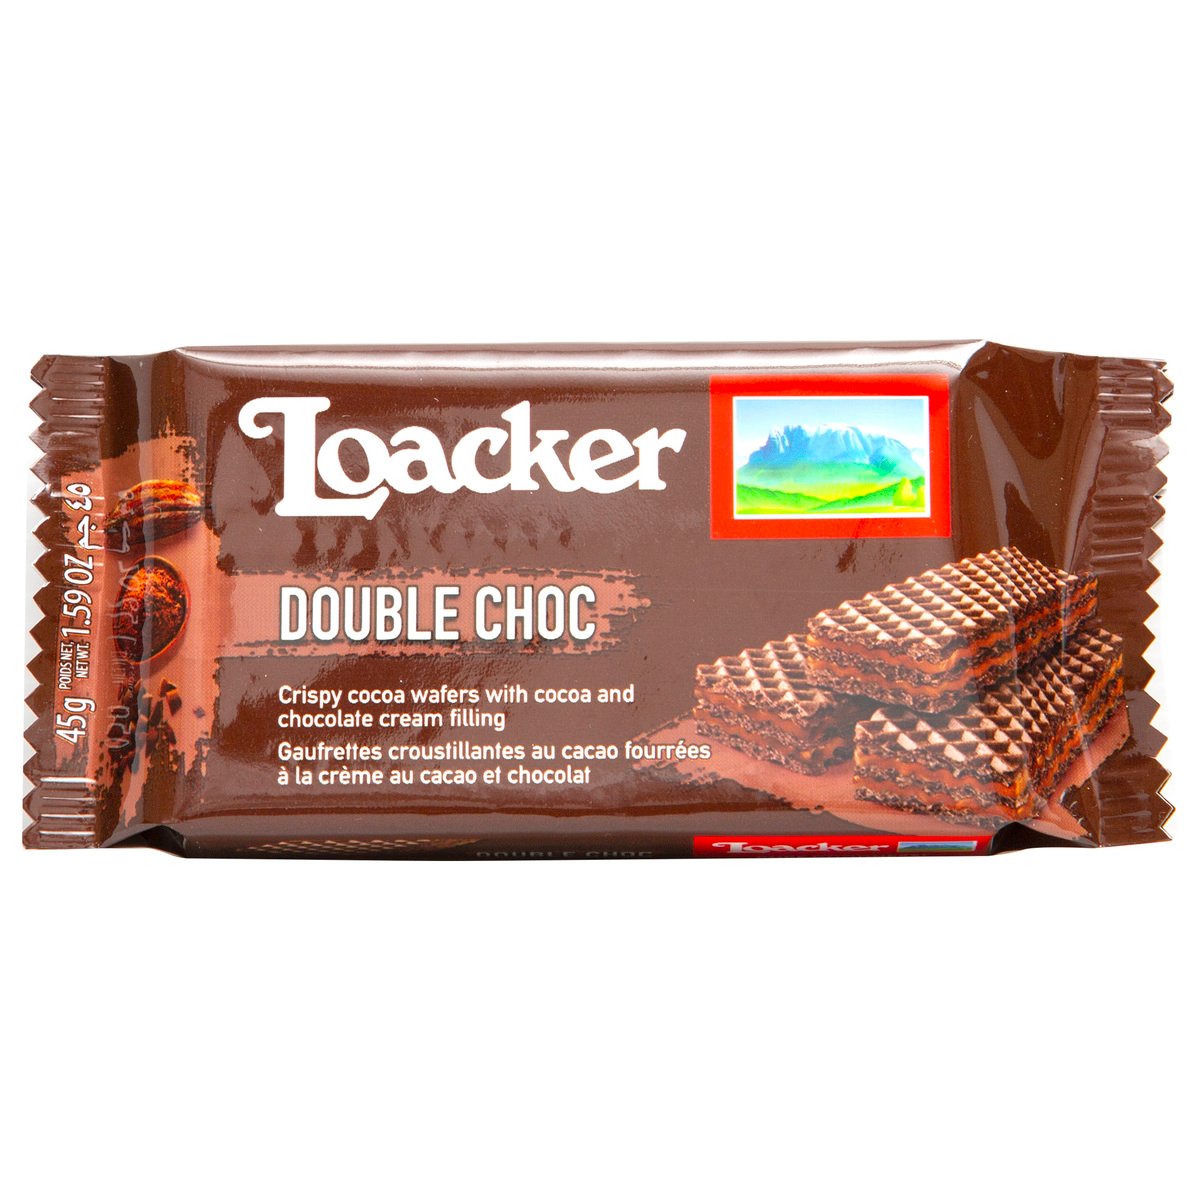 Loacker Double Choc Crispy Wafers With Cocoa And Chocolate Filling 45 g